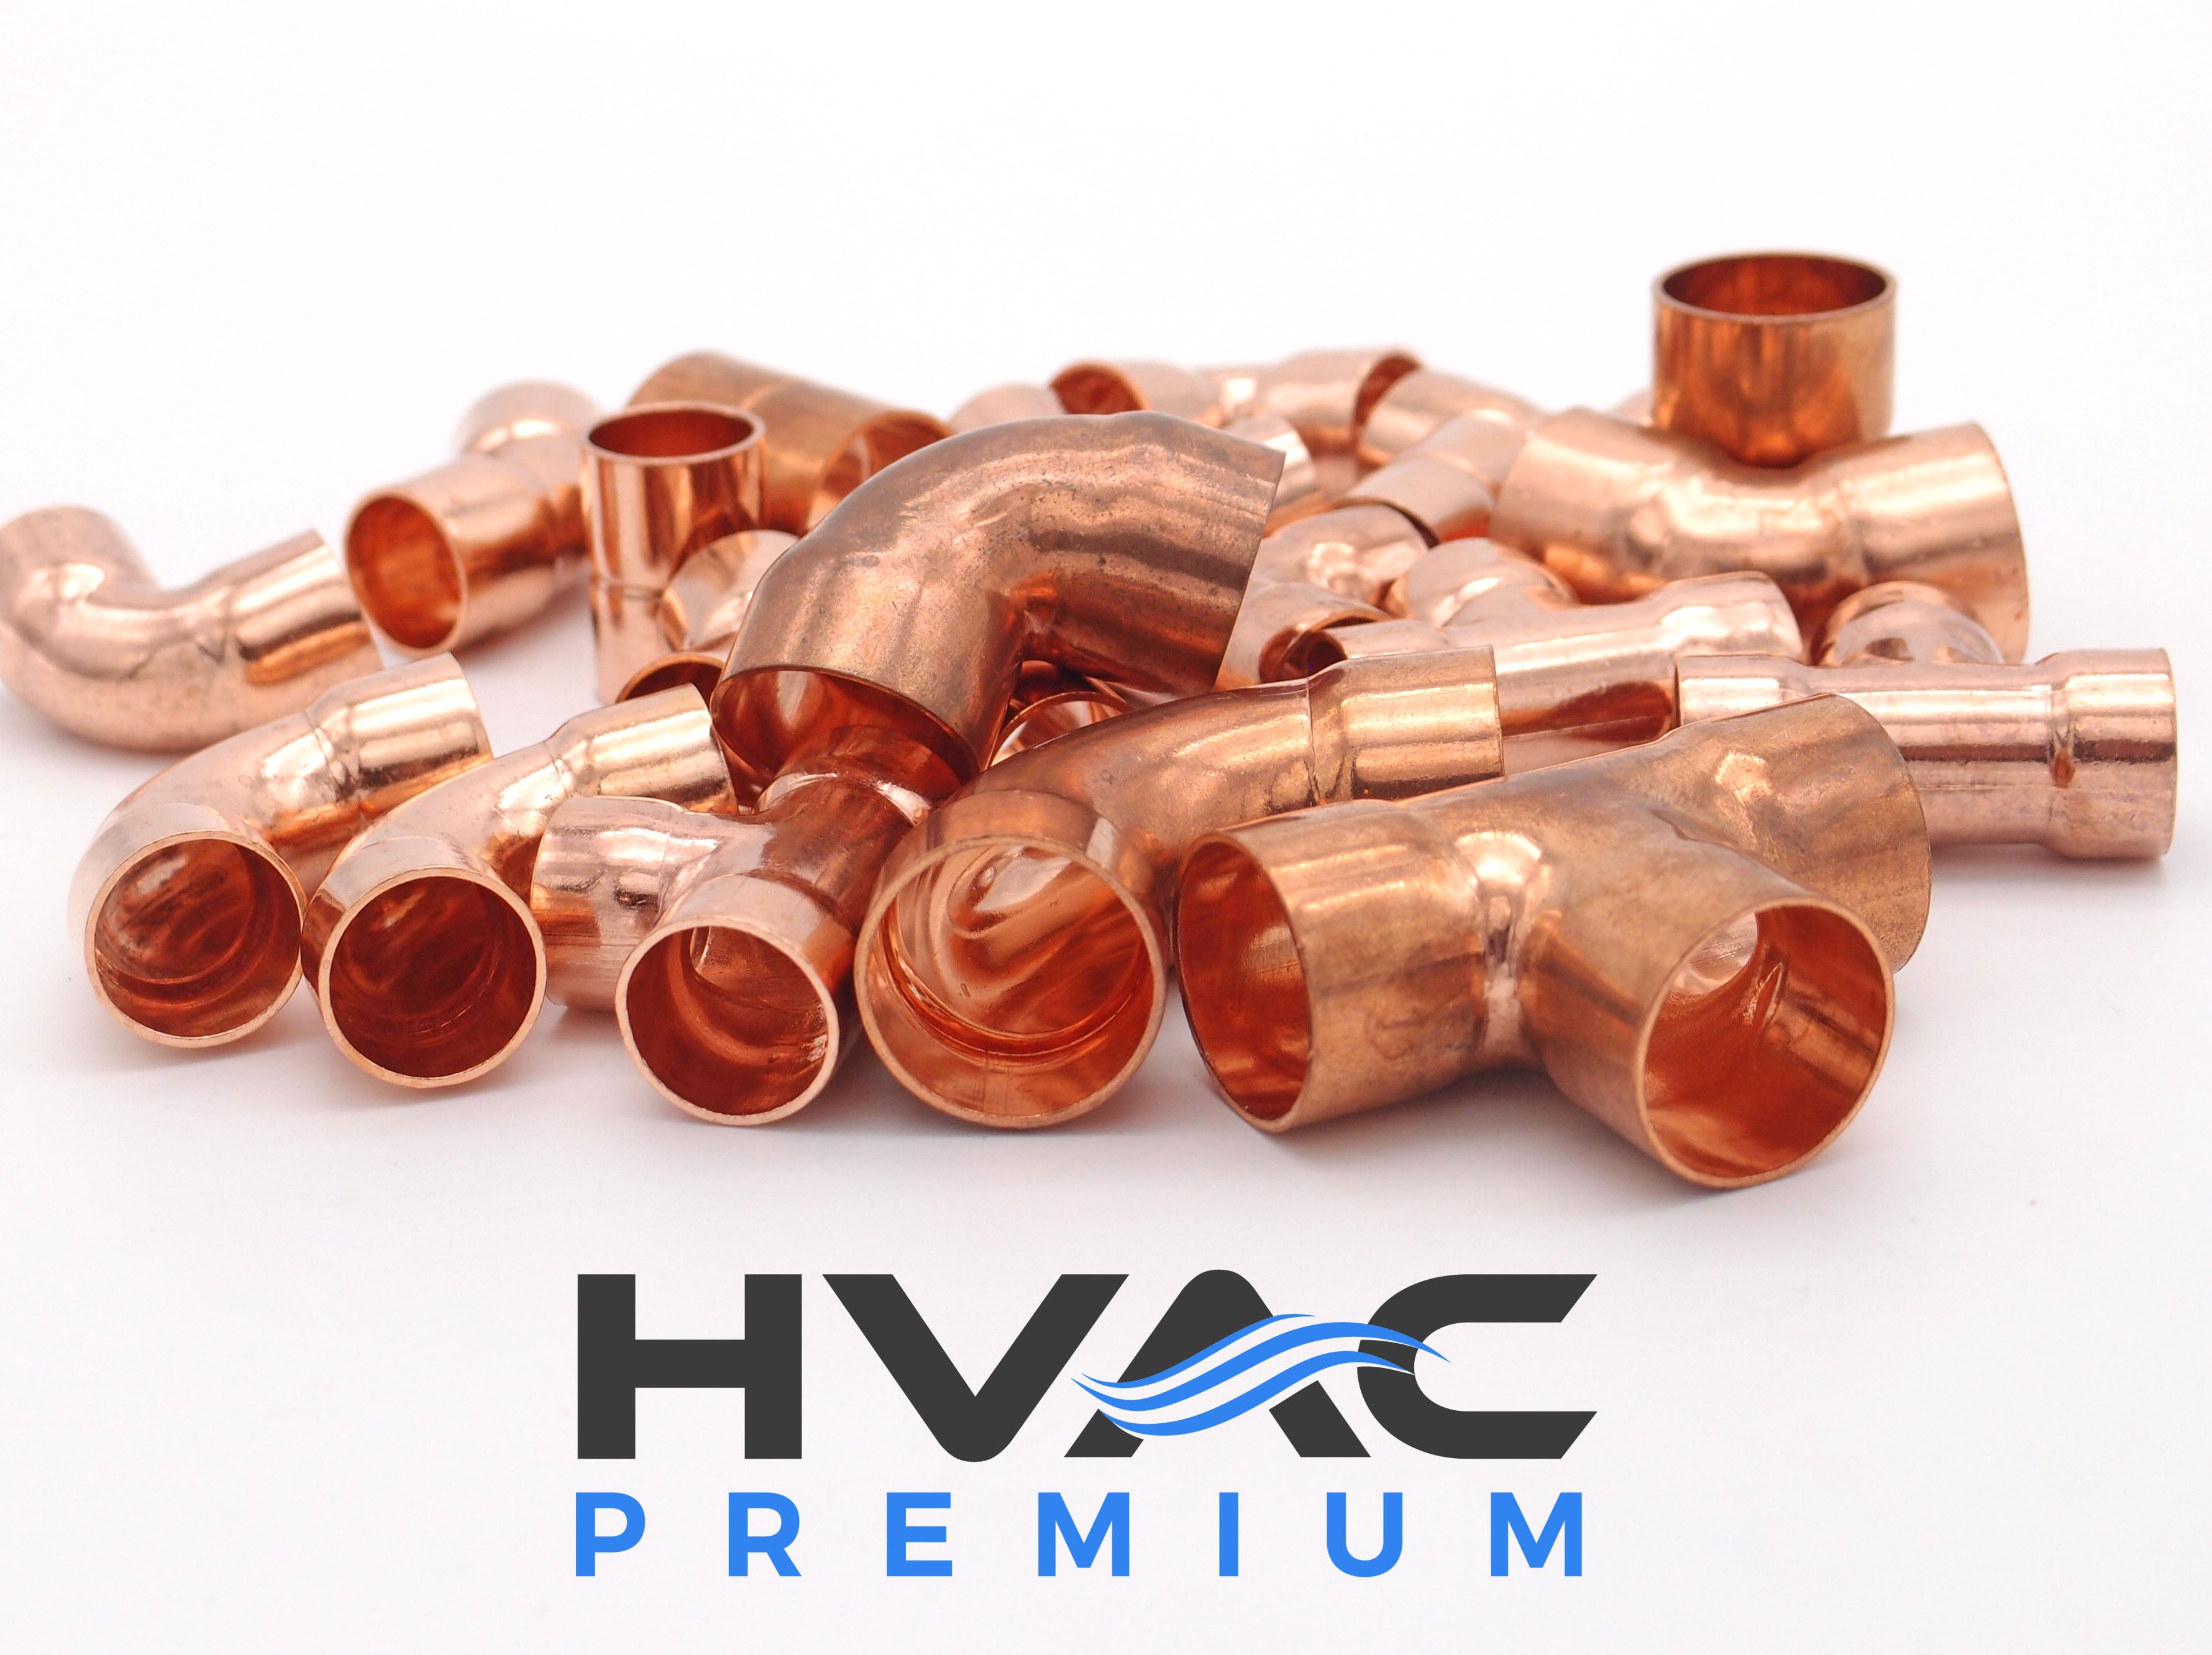 Copper Fitting 7/8 to 1/4 (HVAC Dimensions) Reducer / Increaser Copper Coupling & HVAC – 3/4 to 1/8 (Plumbing Inner Dimensions) 99.9% Pure Copper - 10 Pack